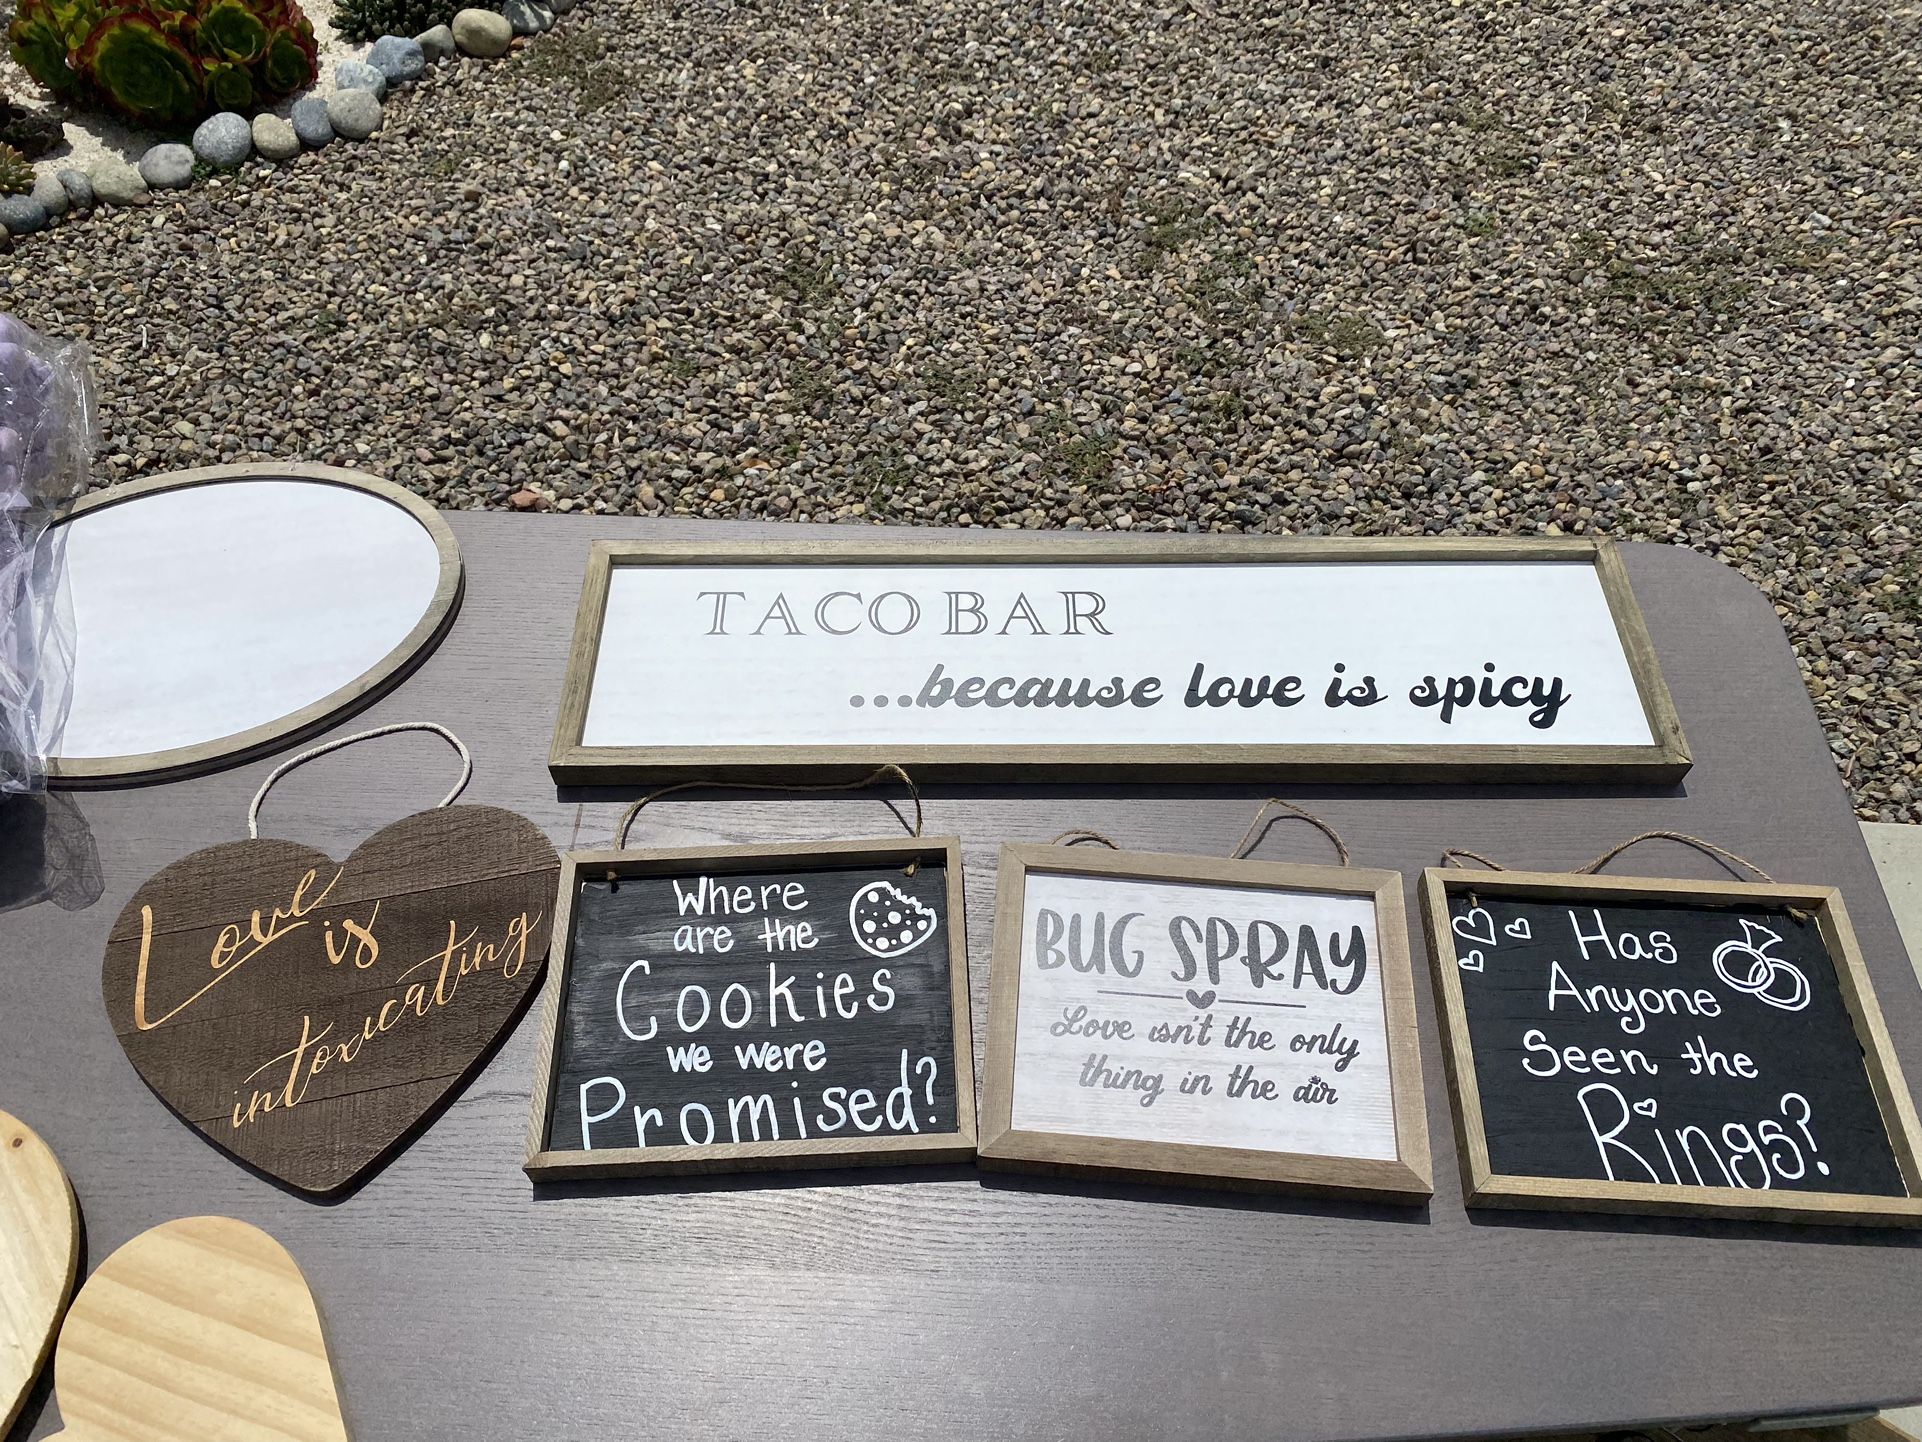 Wedding Signs and Cookie/Cupcake Stand